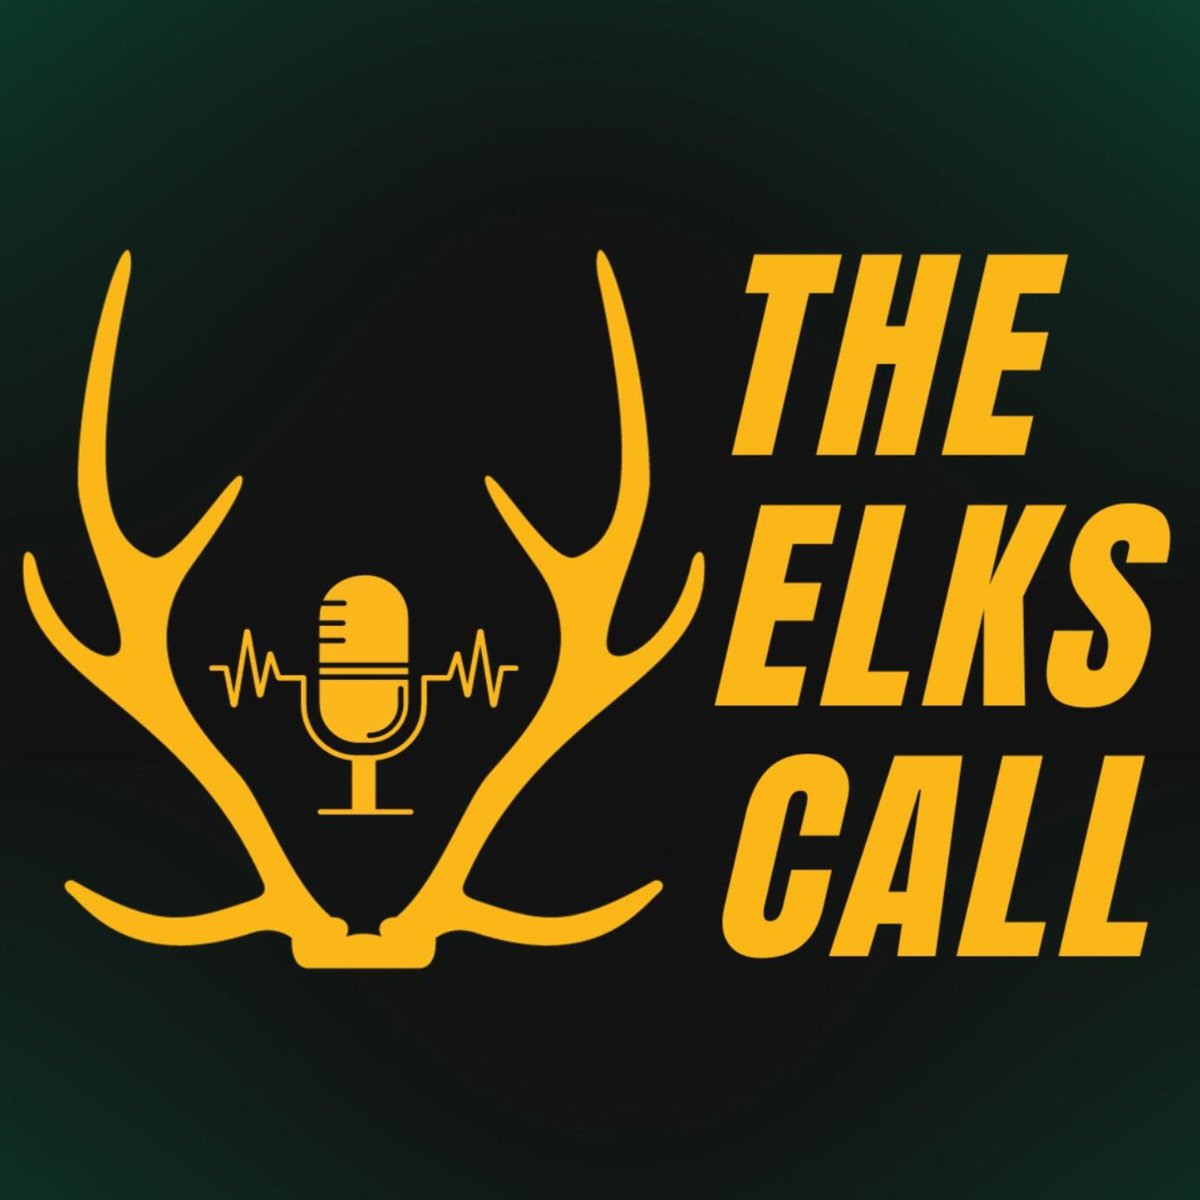 TOMORROW NIGHT ON THE ELKS CALL: @MykAussie Joins The Herd to discuss: - Chad Kelly fiasco - 2024 CFL Combine - Edmonton Elks inching towards private ownership - Odds and Futures for the upcoming CFL season ...And More! Tune in at 8:30PM on @ShotgunSportNet #GoElks #CFL #YEG